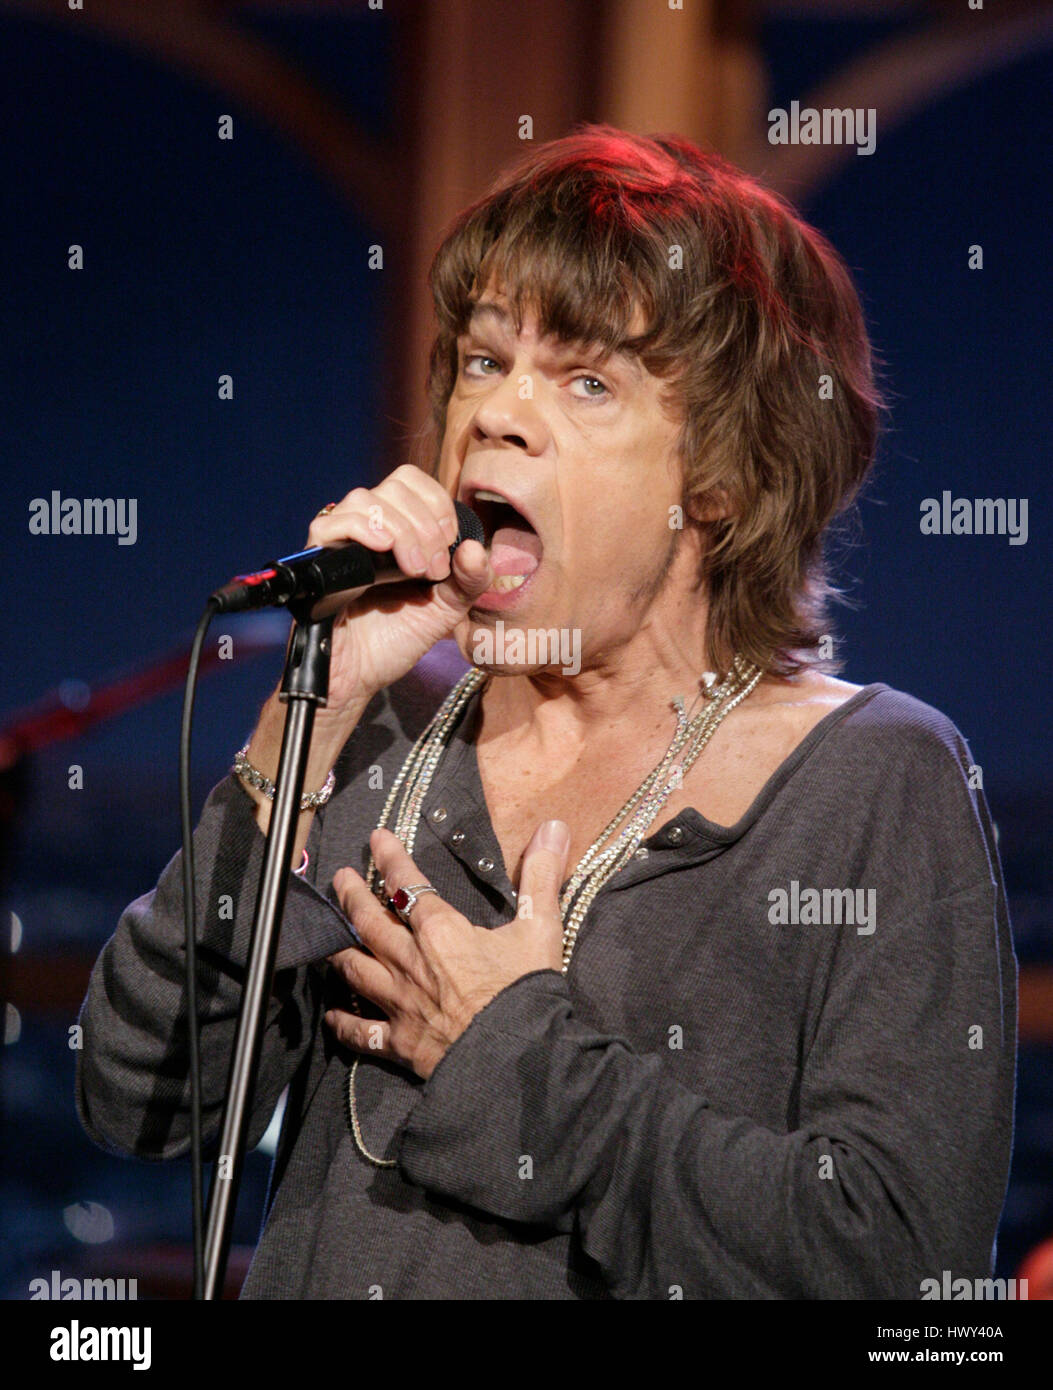 The band, 'New York Dolls' with David Johansen on lead vocals, perform during a segment of 'The Late Late Show with Craig Ferguson' at CBS Television City in Los Angeles on Tuesday, Oct. 28, 2008. Photo by Francis Specker Stock Photo